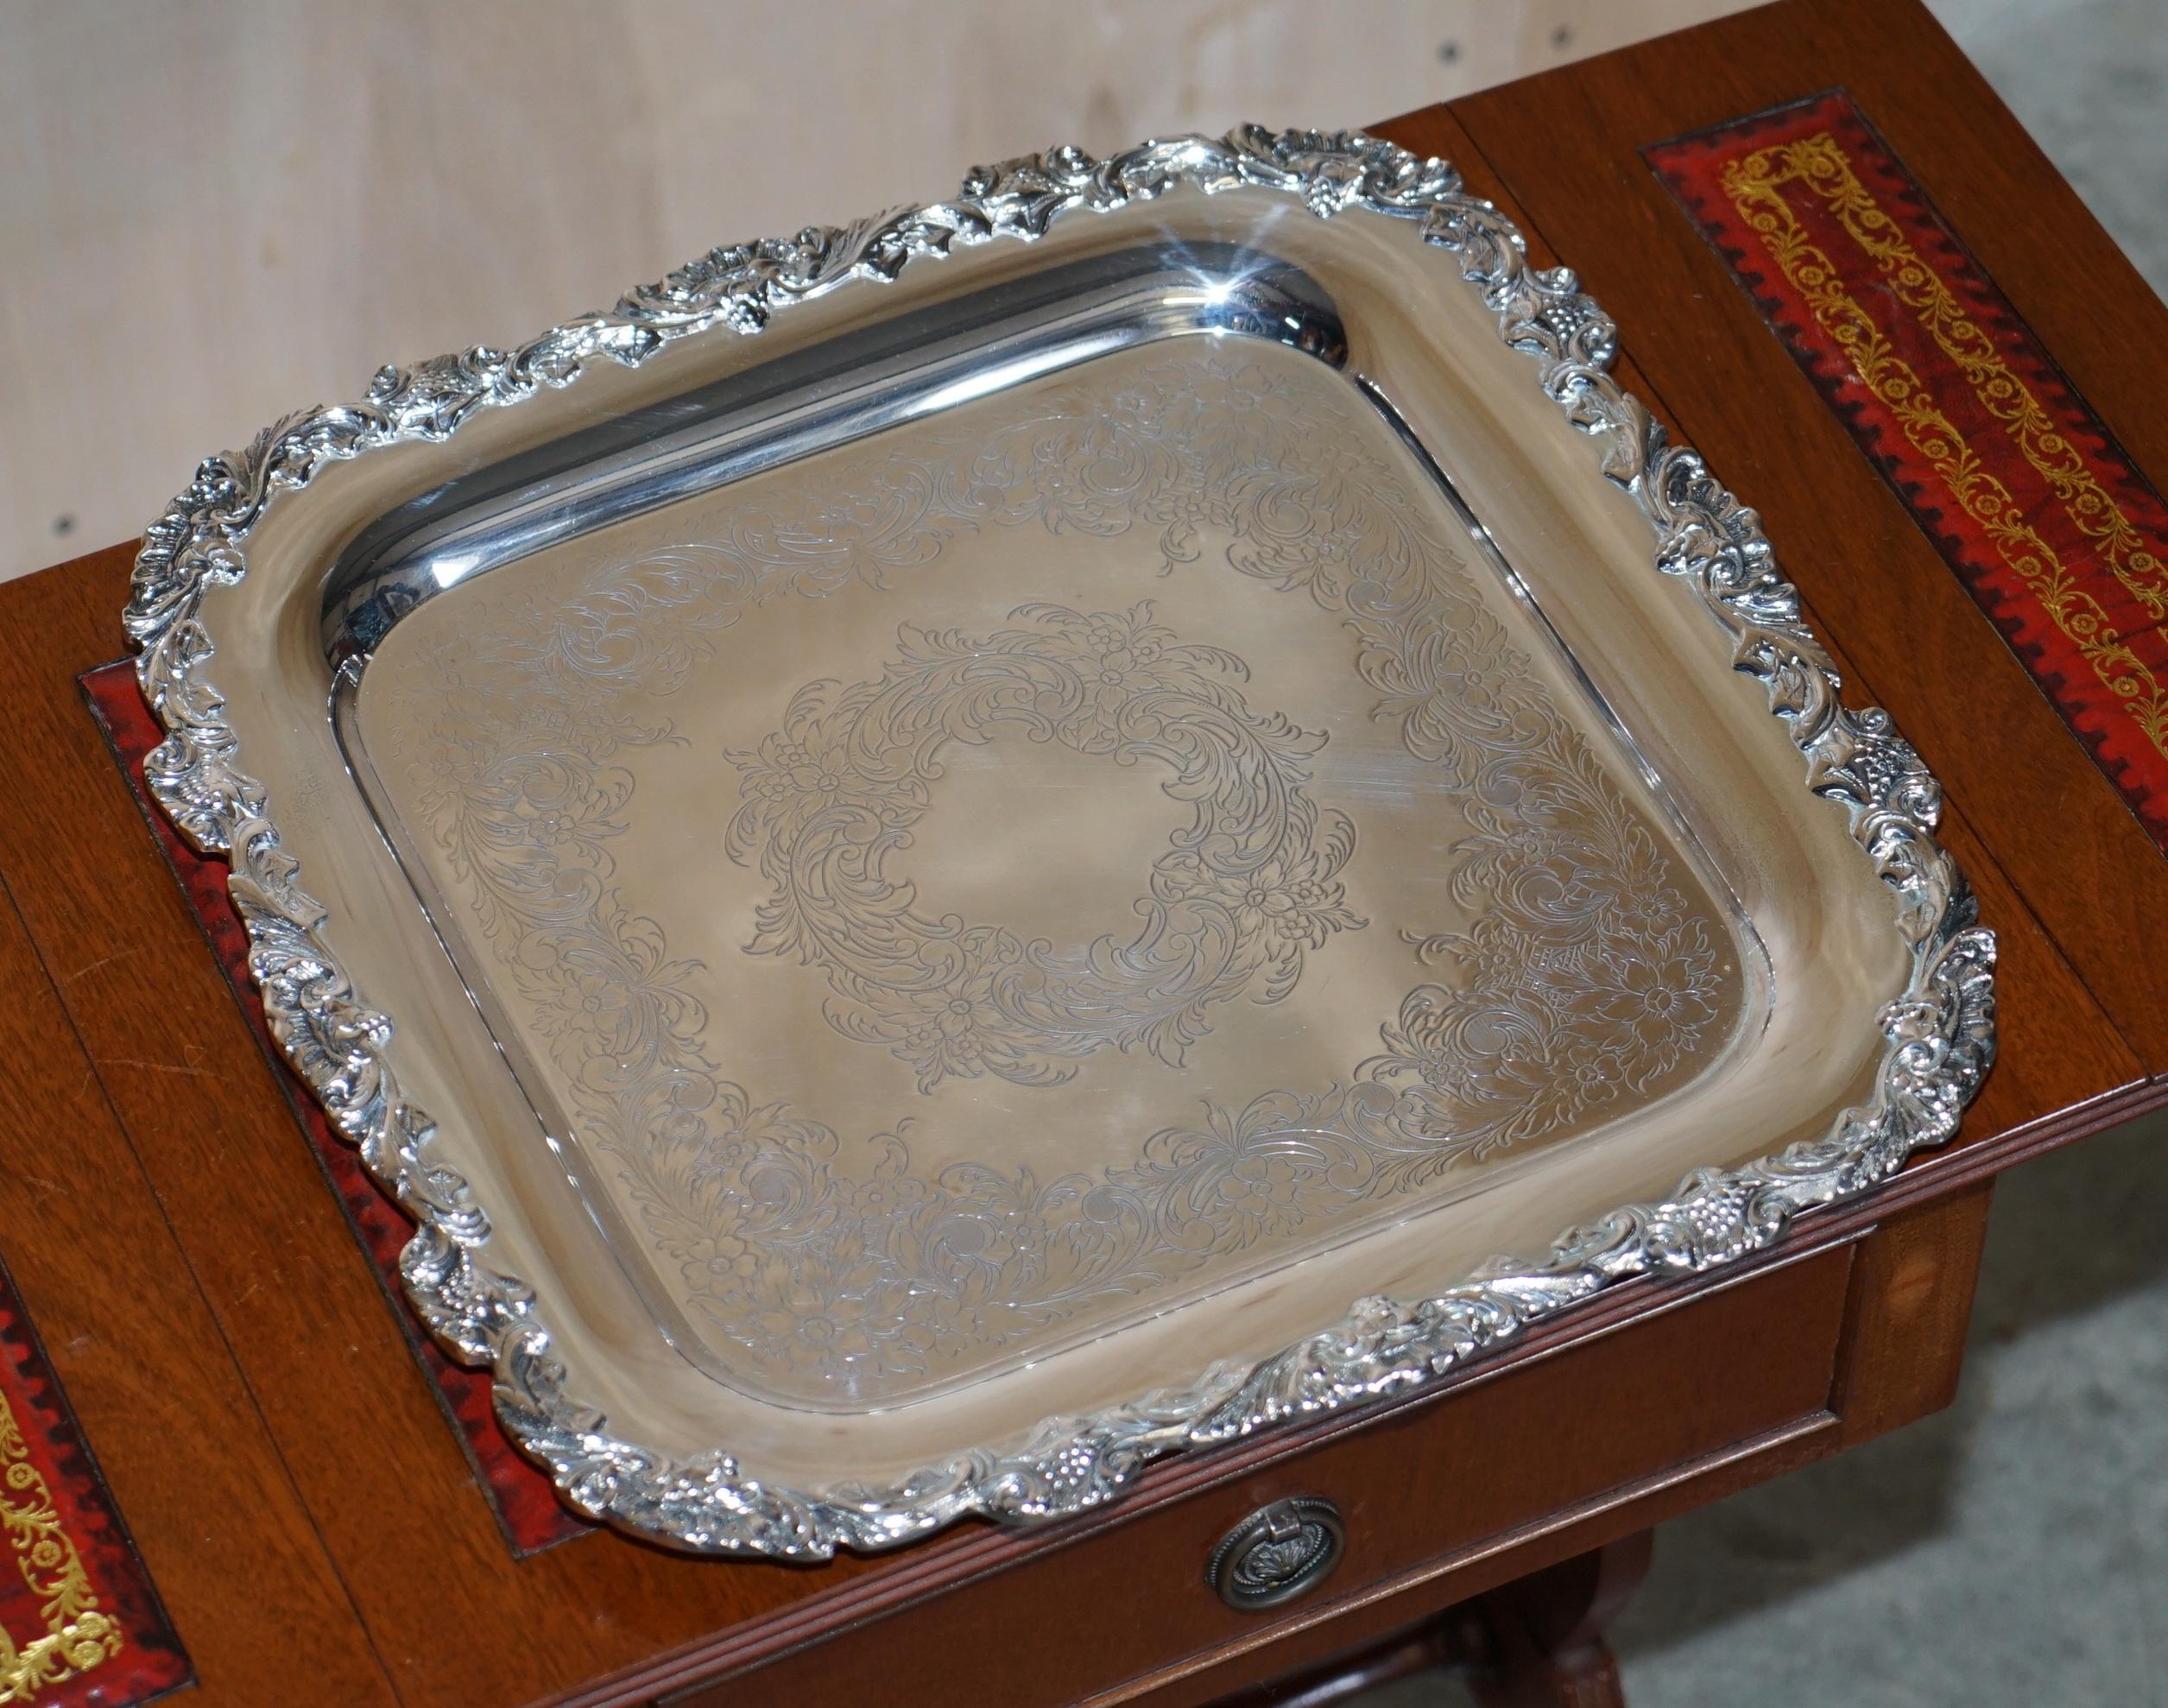 We are delighted to offer for sale this lovely sterling silver plated Webster & Wilcox serving tray.

A good looking and highly decorative serving tray which brings a sense of occasion to serving drinks.

The tray comes with a cover case to keep